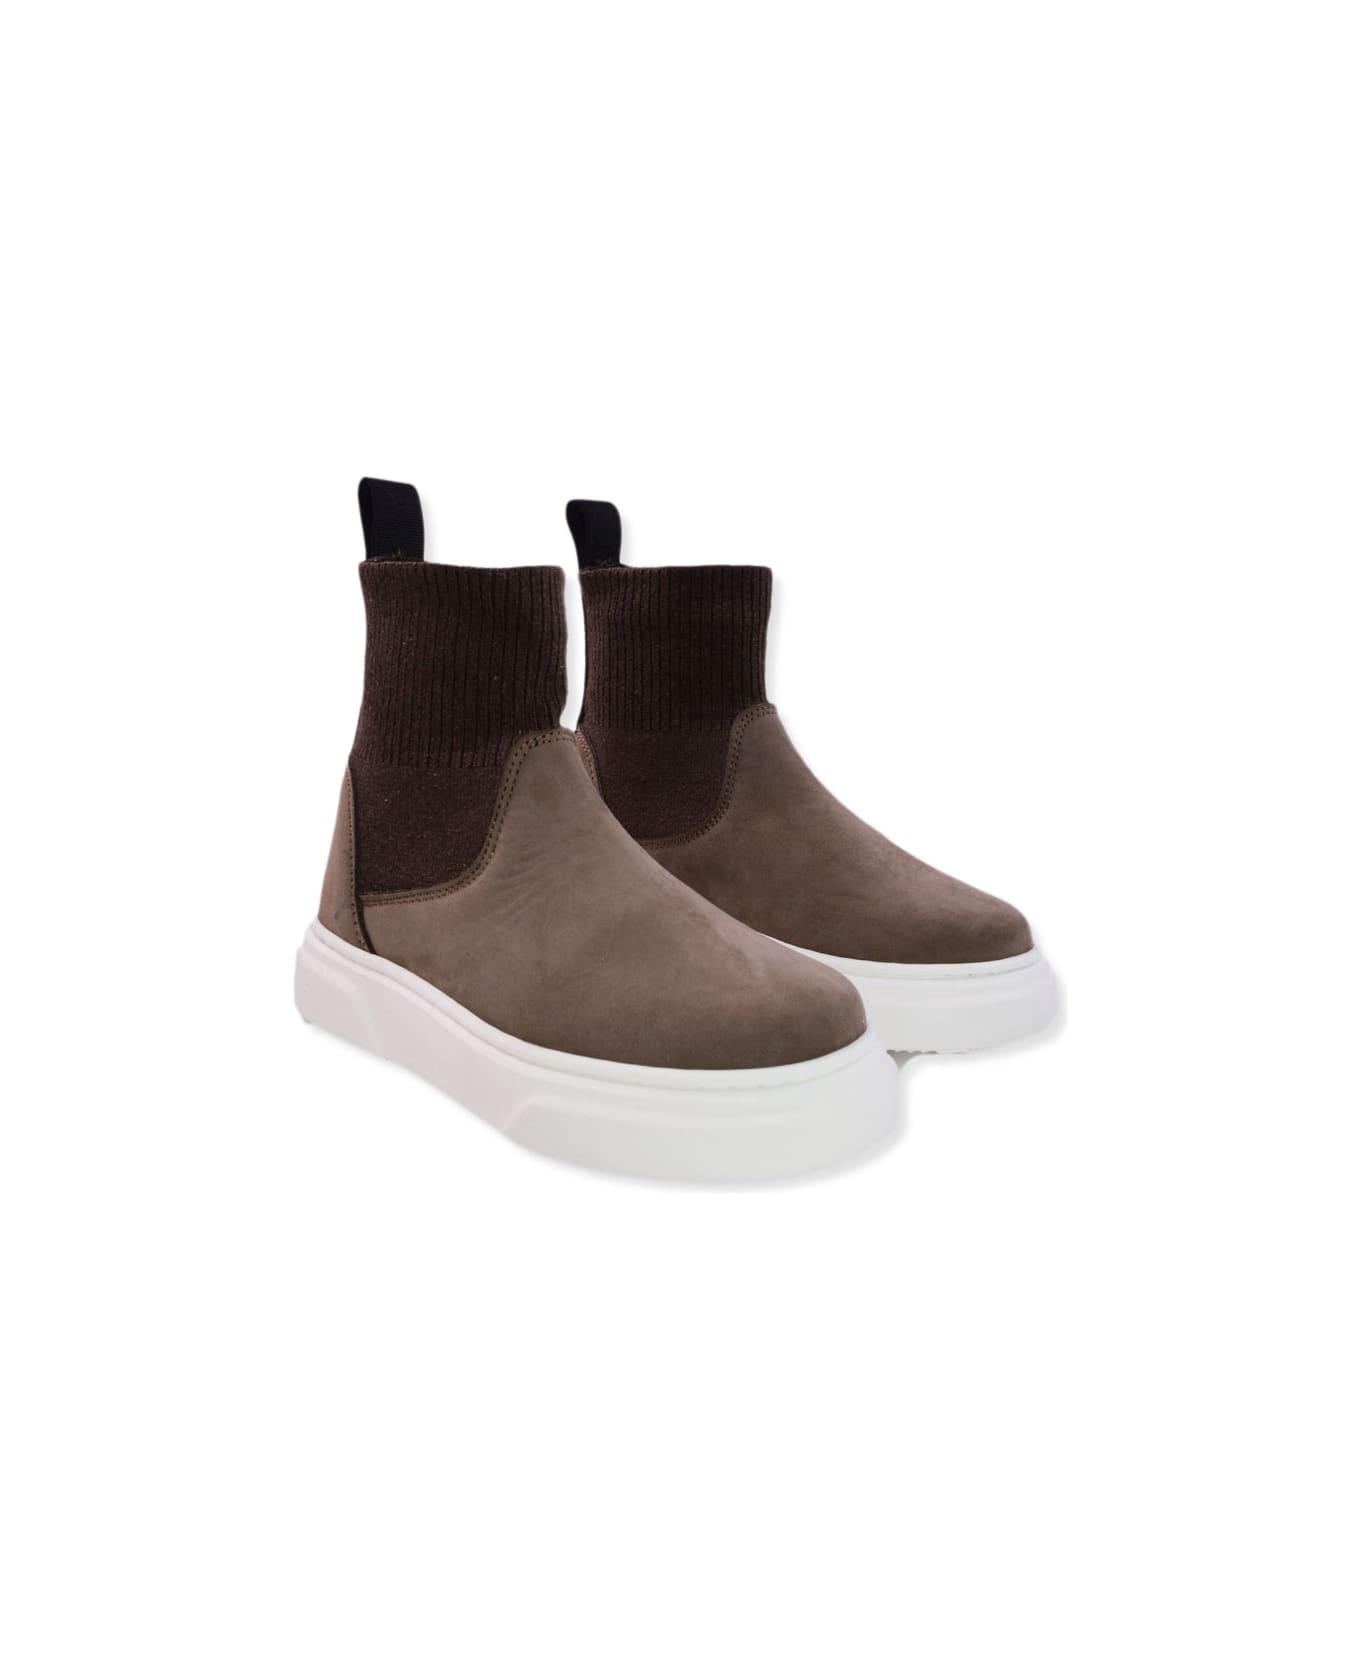 Andrea Montelpare Ankle Boot In Suede Leather - Brown